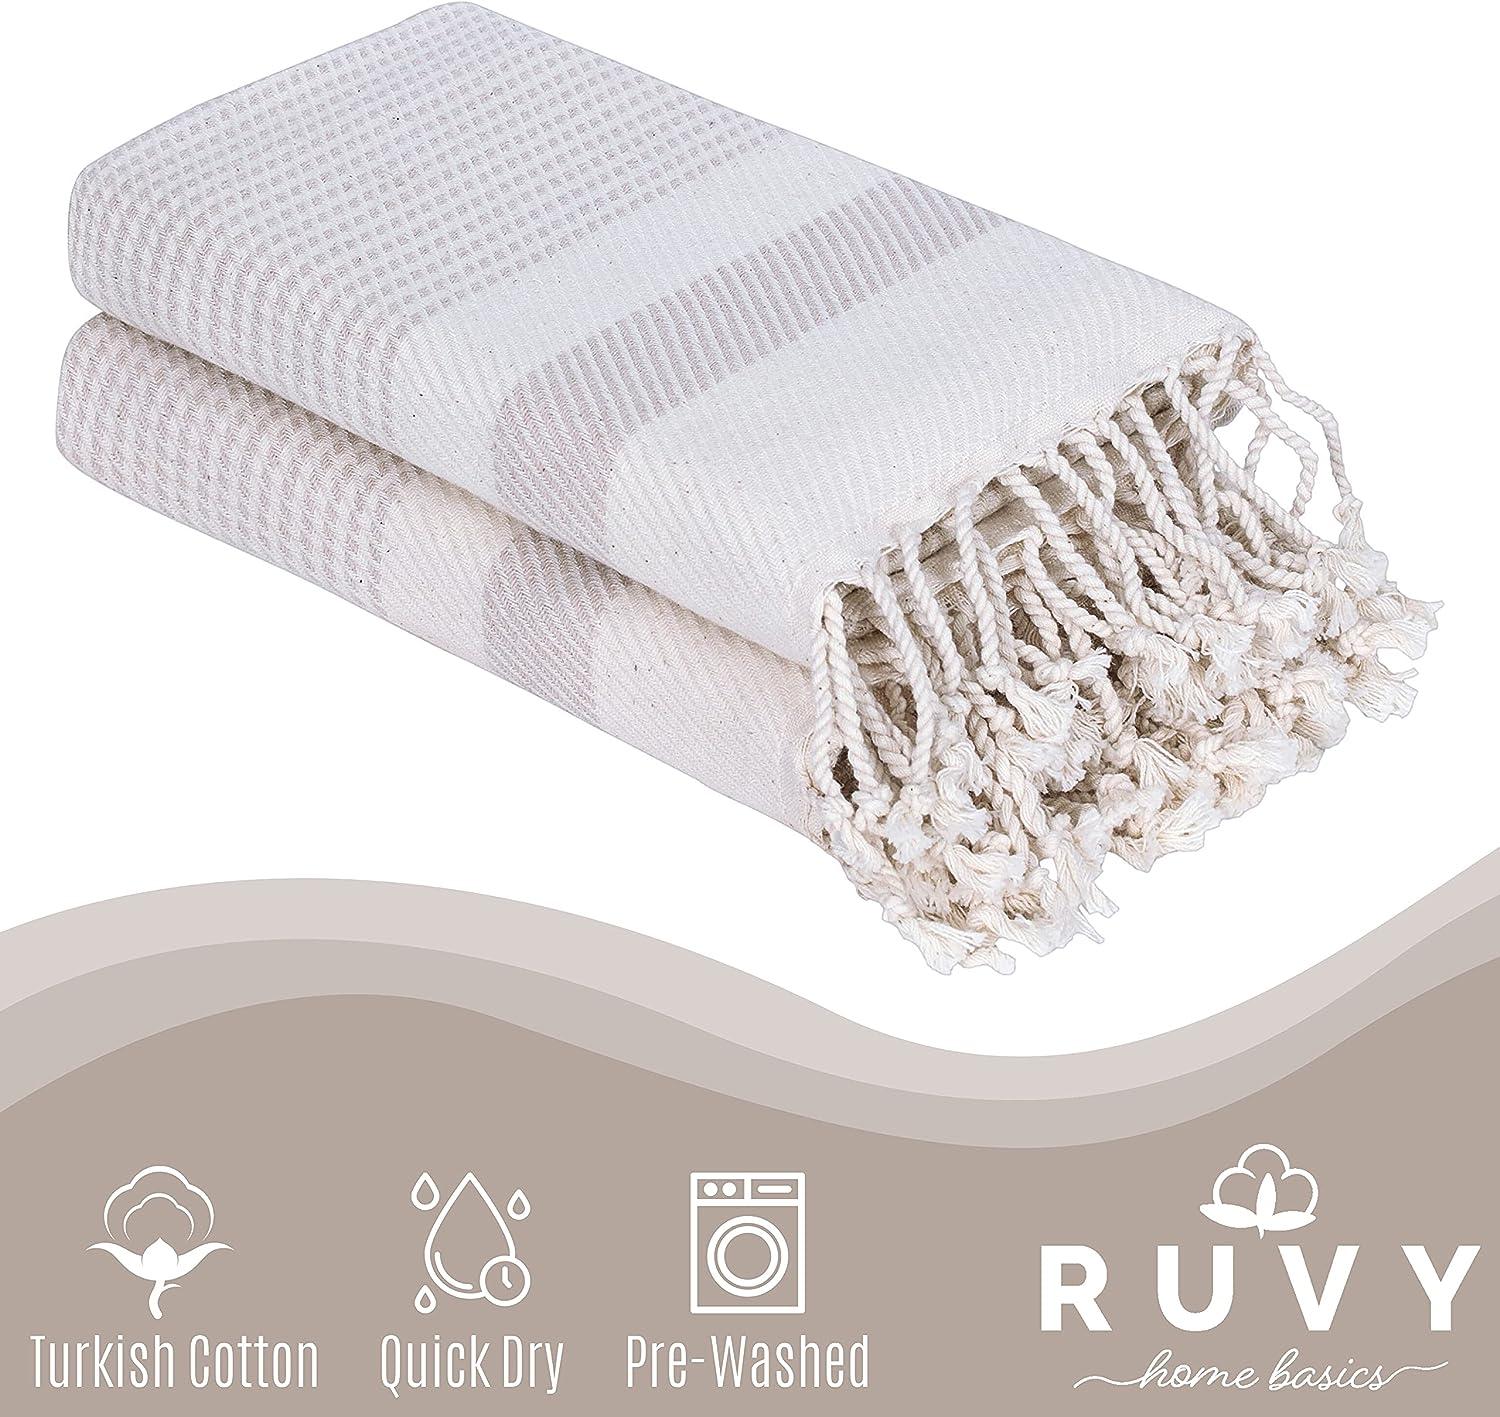 Ruvy Home Basics Turkish Hand Towels for Bathroom Set of 2